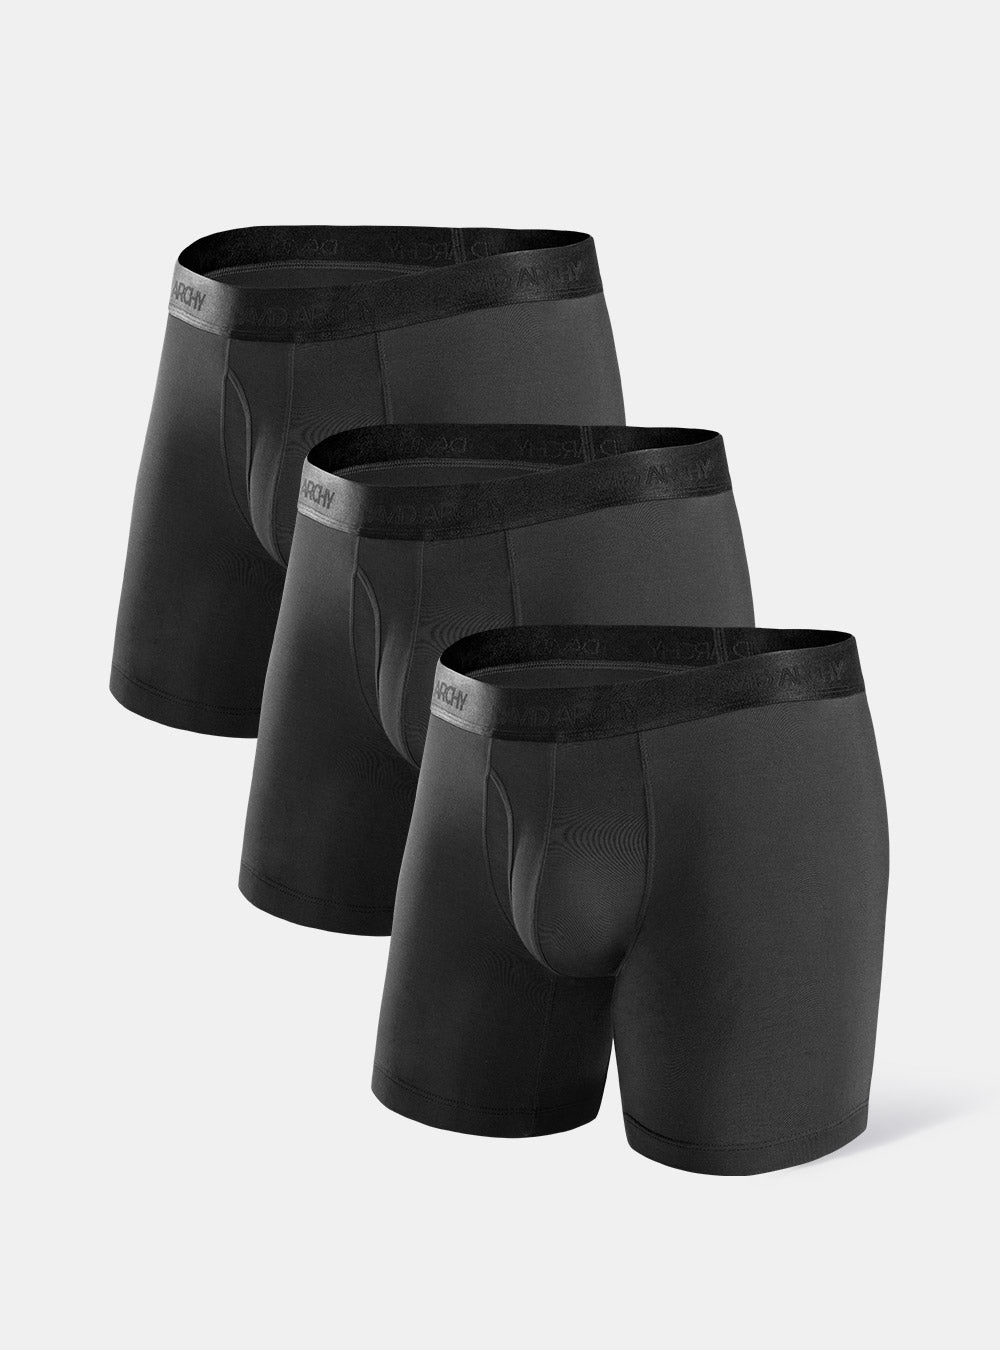 David Archy 3 Packs Boxer Briefs With Fly No-Ride Up Comfy Silky 3D Men ...